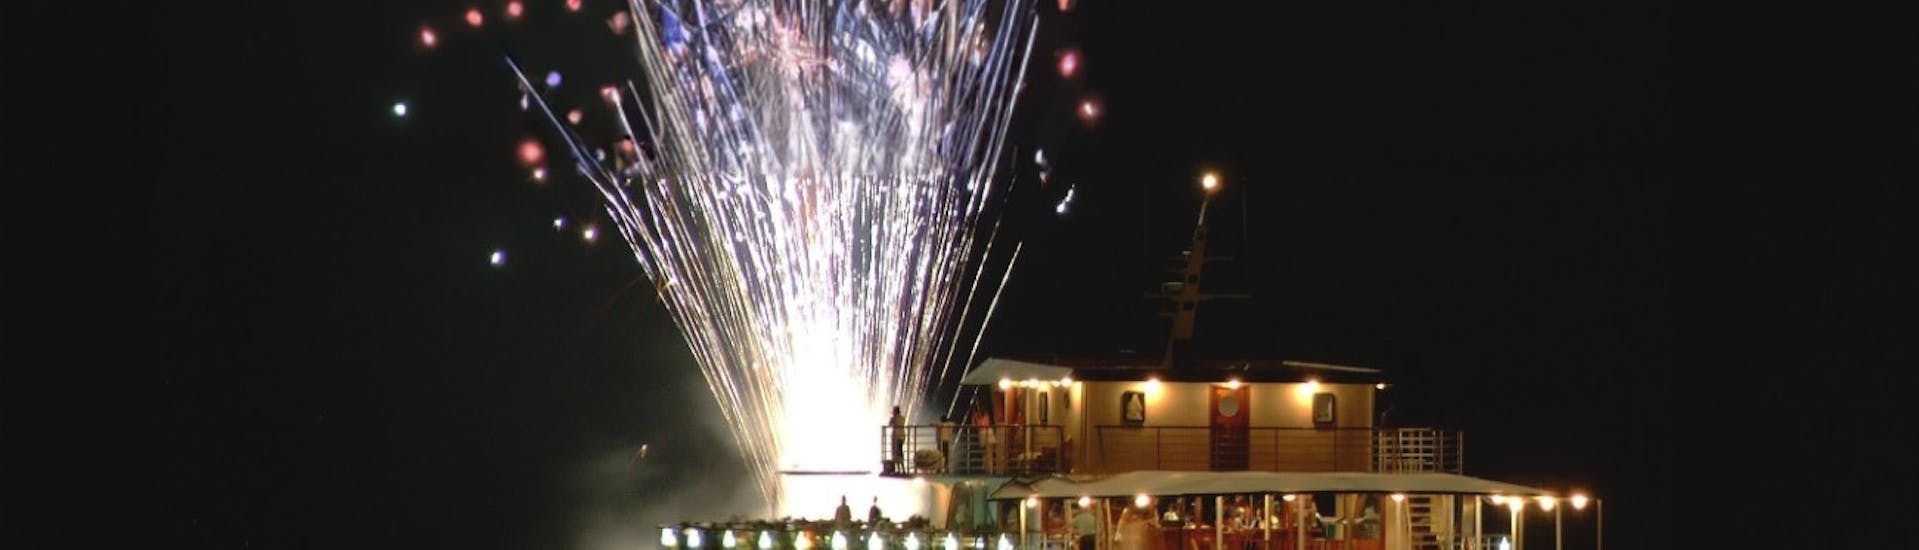 Boat Trip to Rikkos Beach with Dinner, Live Music & Fireworks - Adults Only.